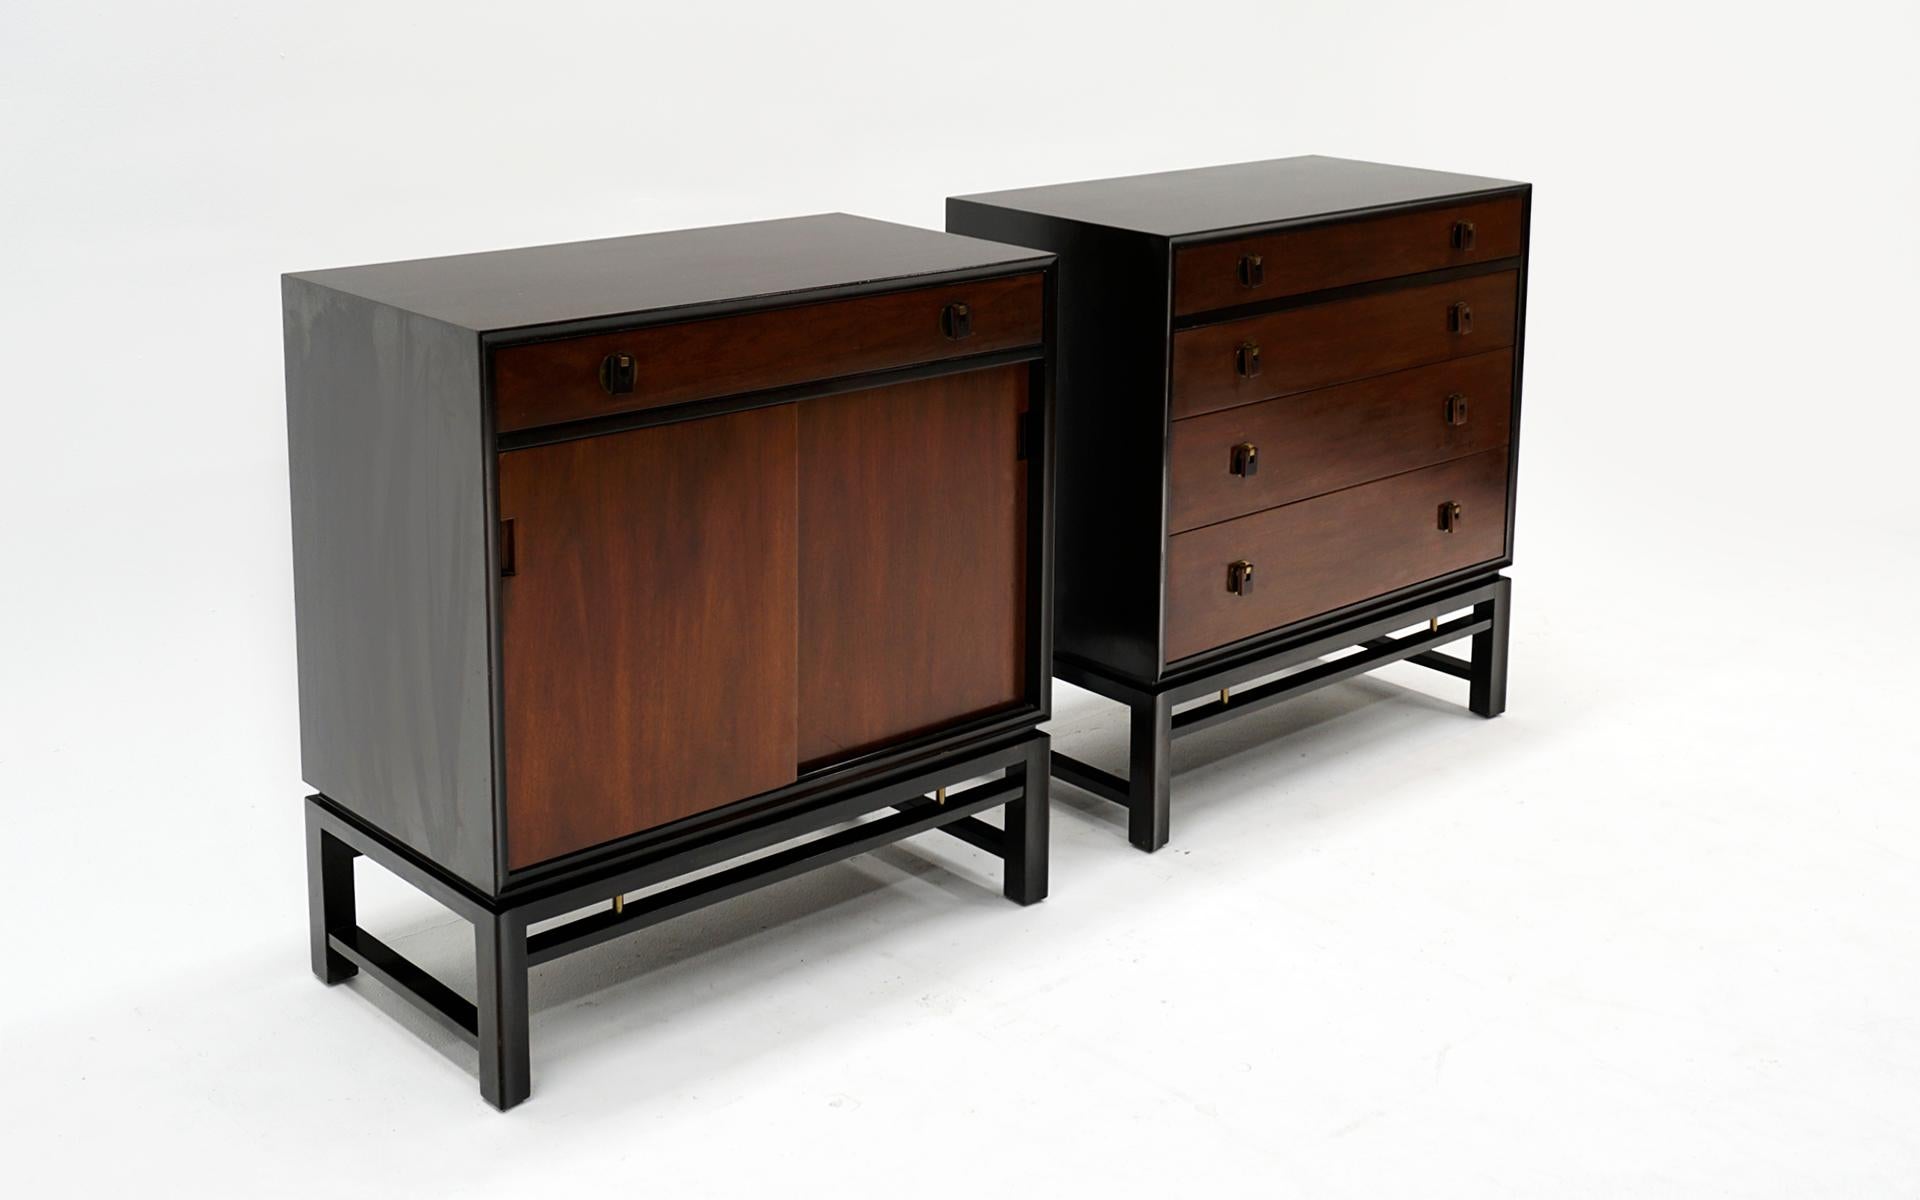 Pair of cabinets designed by Edward Wormley for Dunbar, 1950s. Dark mahogany frames with brass detail. Faces are a.lighter stained mahogany with rosewood pulls. One owner, original and show some wear in the form of scratches, dents, but can be used